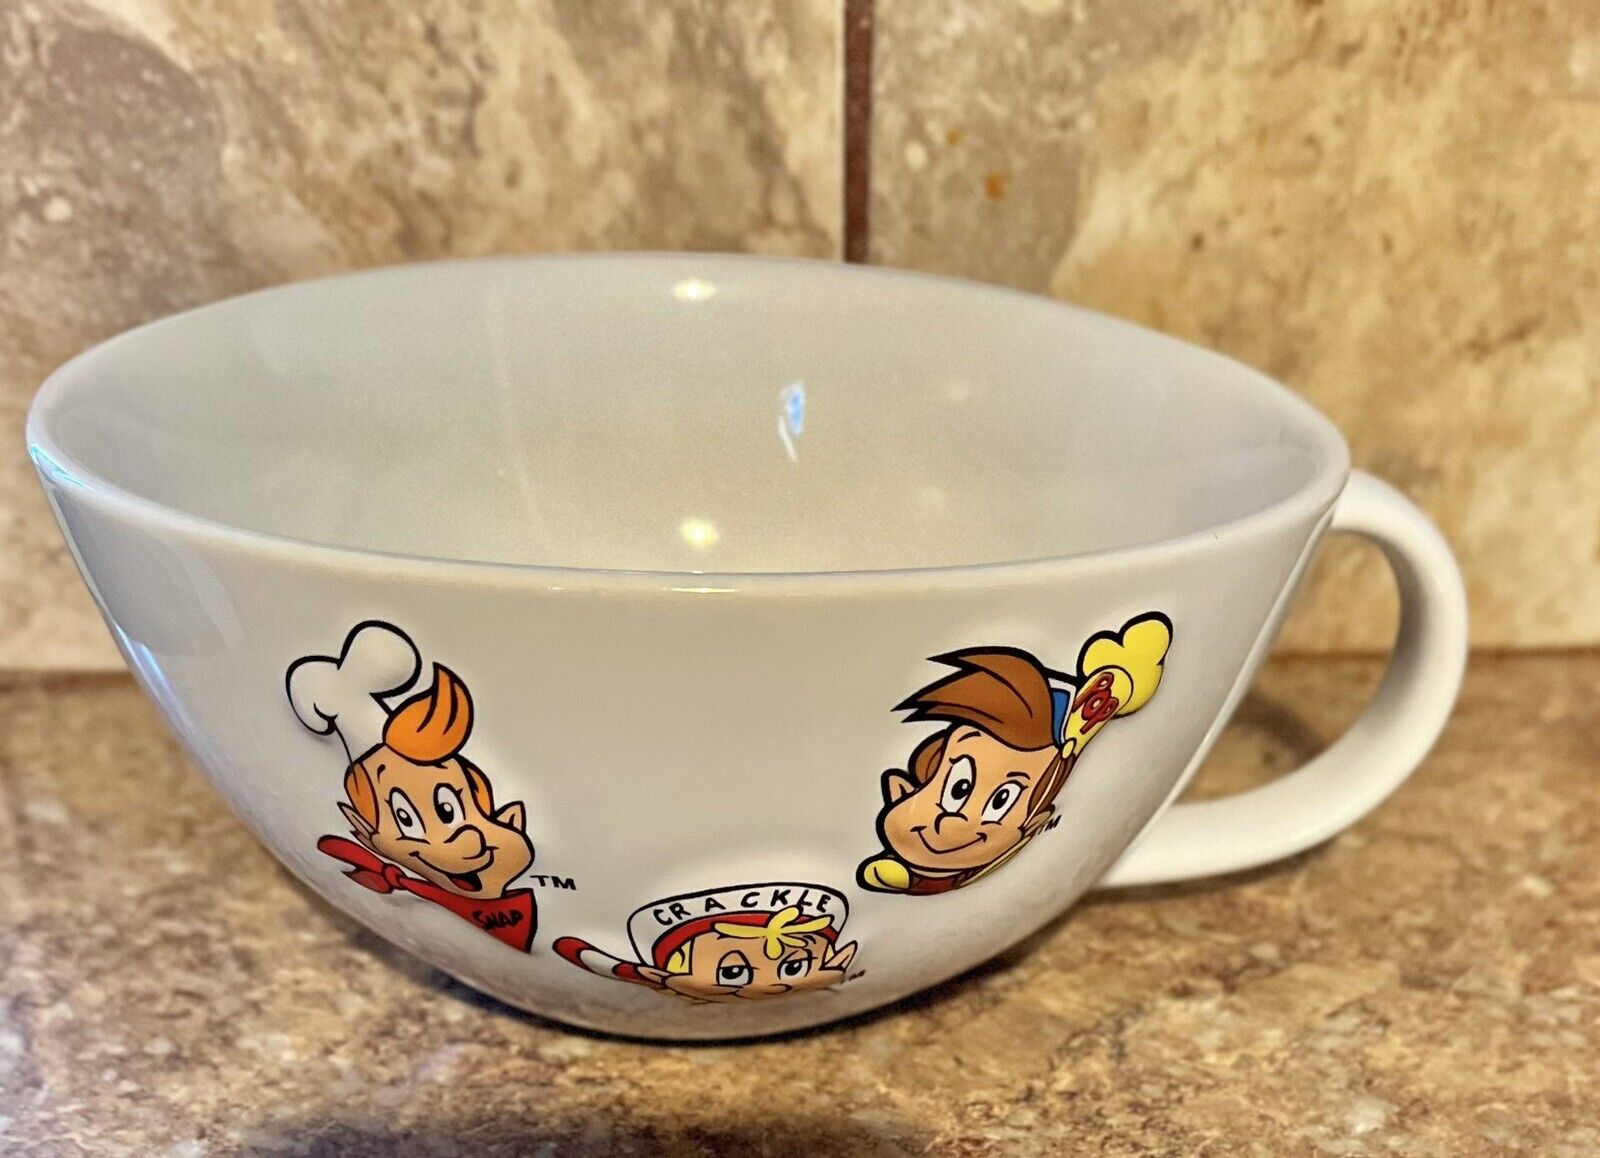 Kellogg's Snap Crackle Pop Ceramic Cereal Bowl With A Handle Vtg 1999